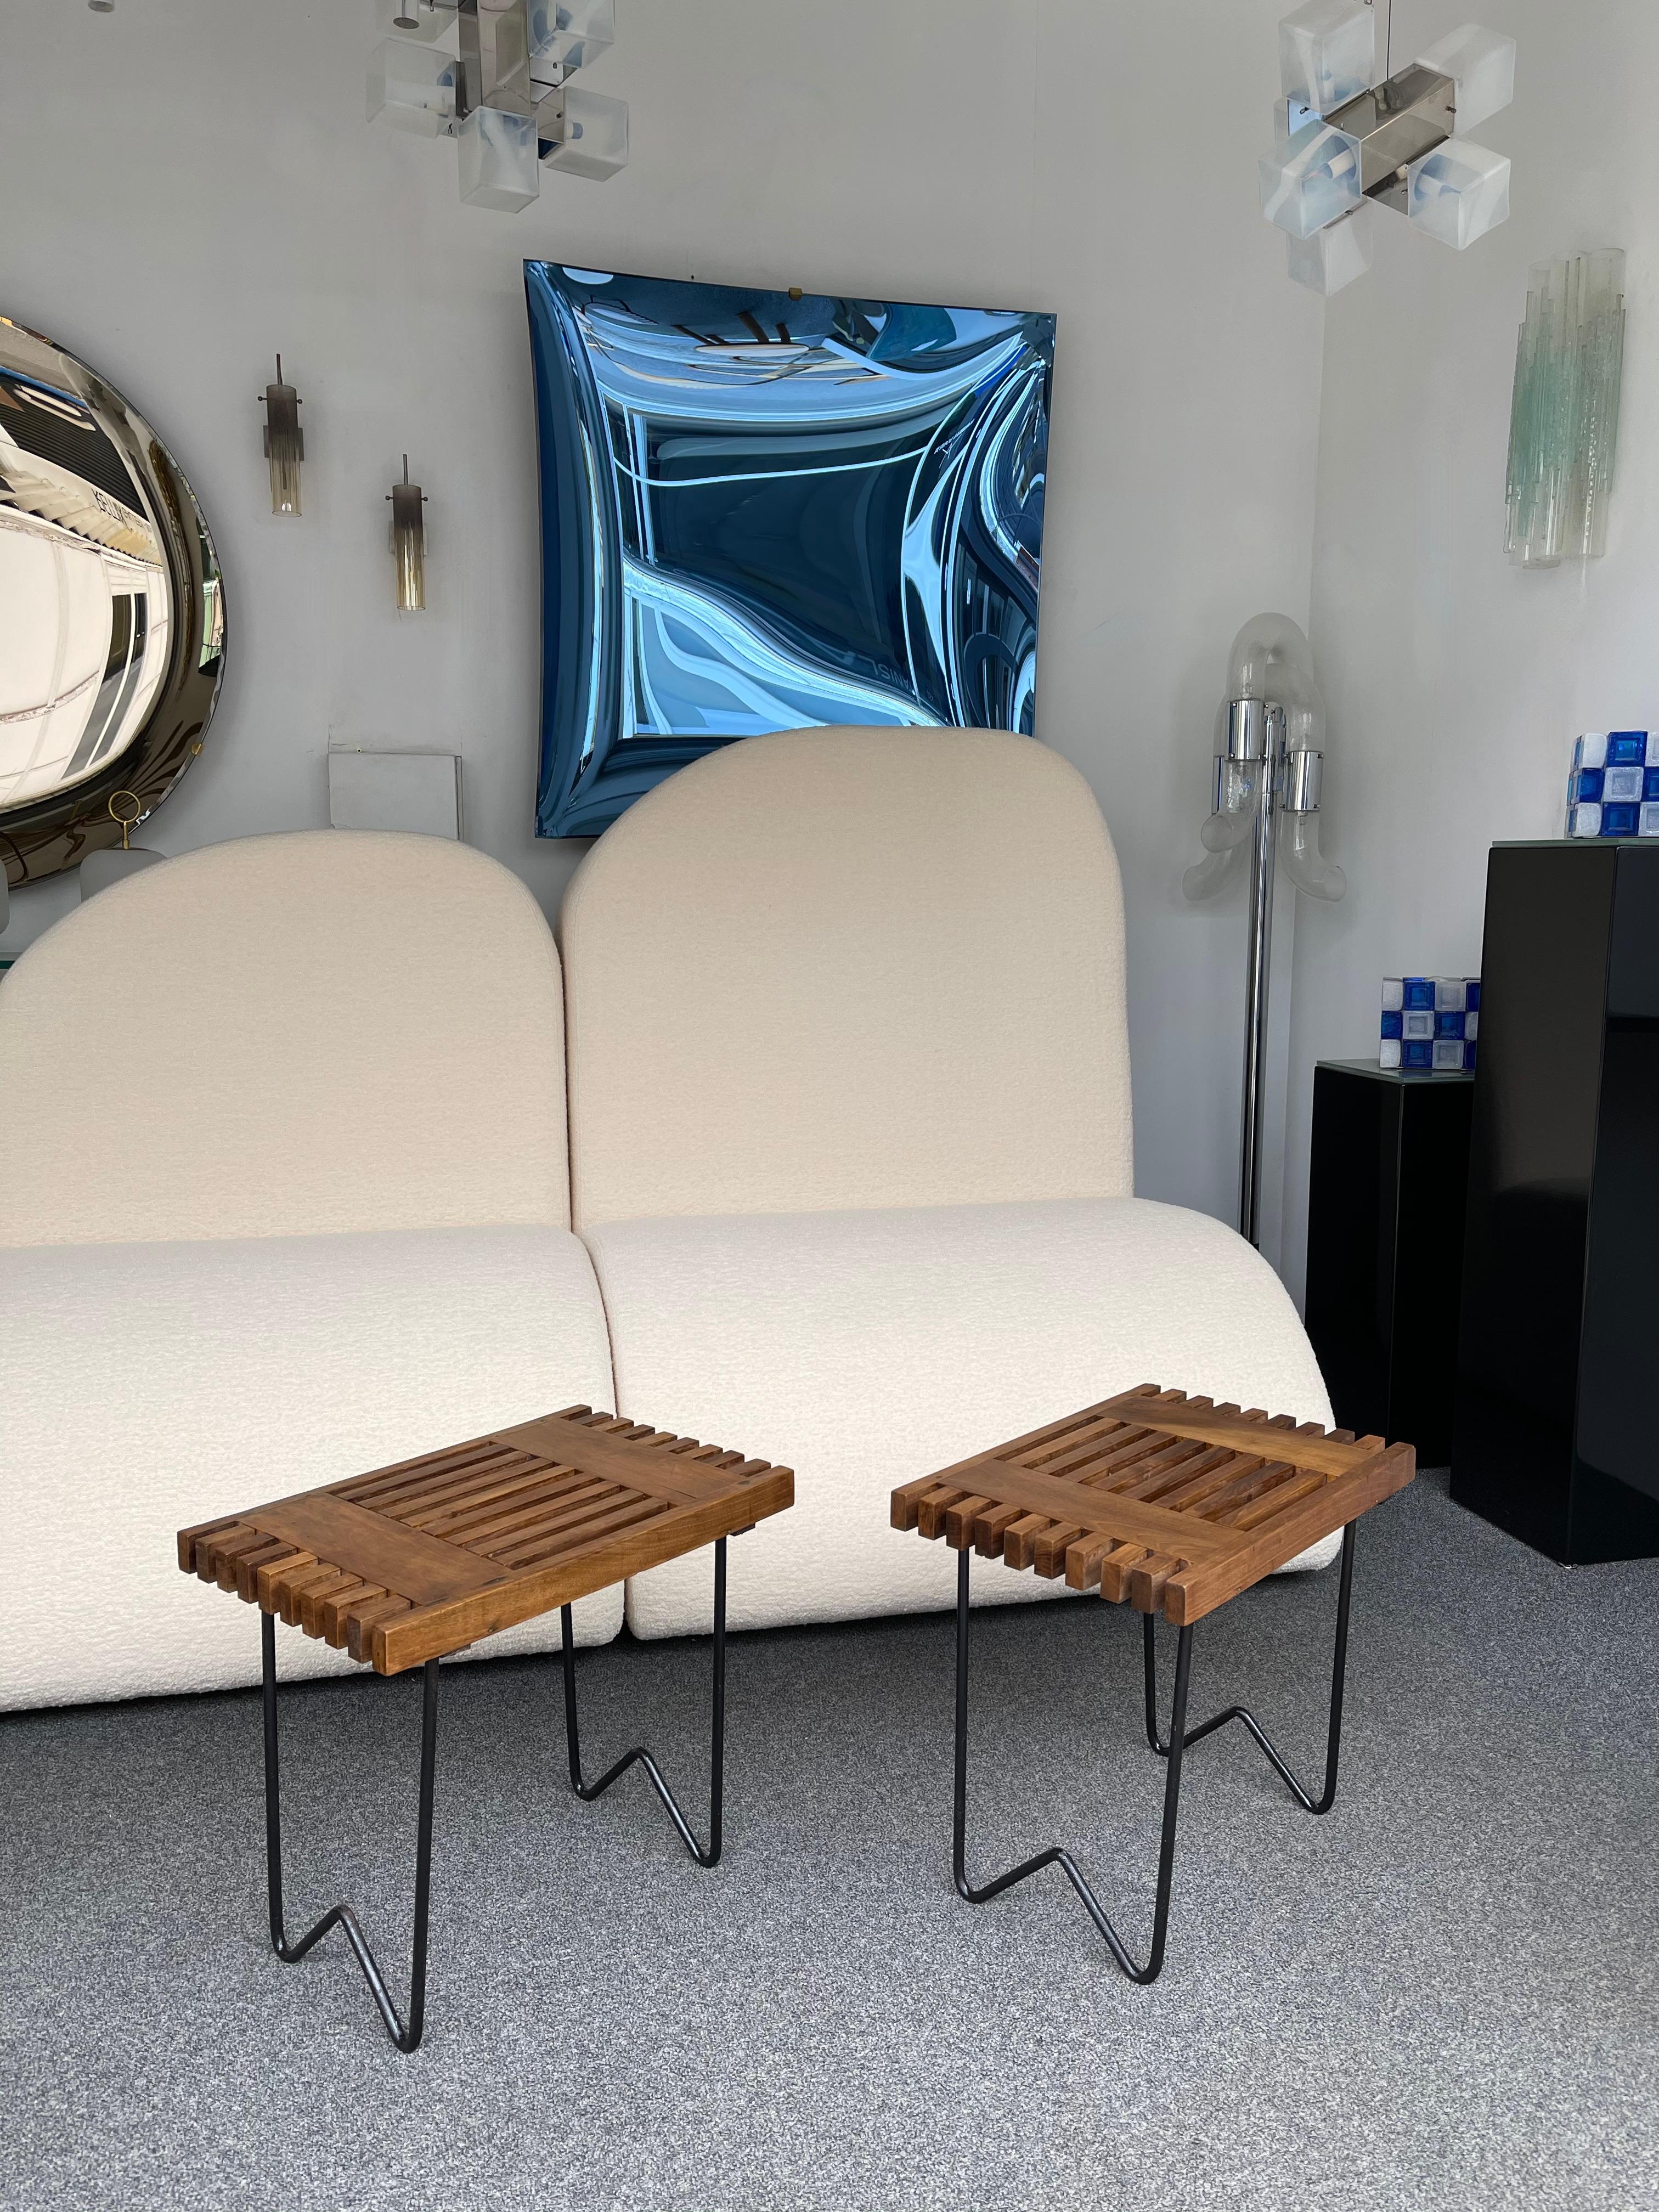 Italian Mid-Century Modern wood and black lacquered metal feet stools poufs or ottoman or coffee low cocktail, side end tables or nightstands. In the mood of Gio Ponti, Pierre Jeanneret, Chandigarh, Le Corbusier, Jean Prouvé, Charlotte Perriand